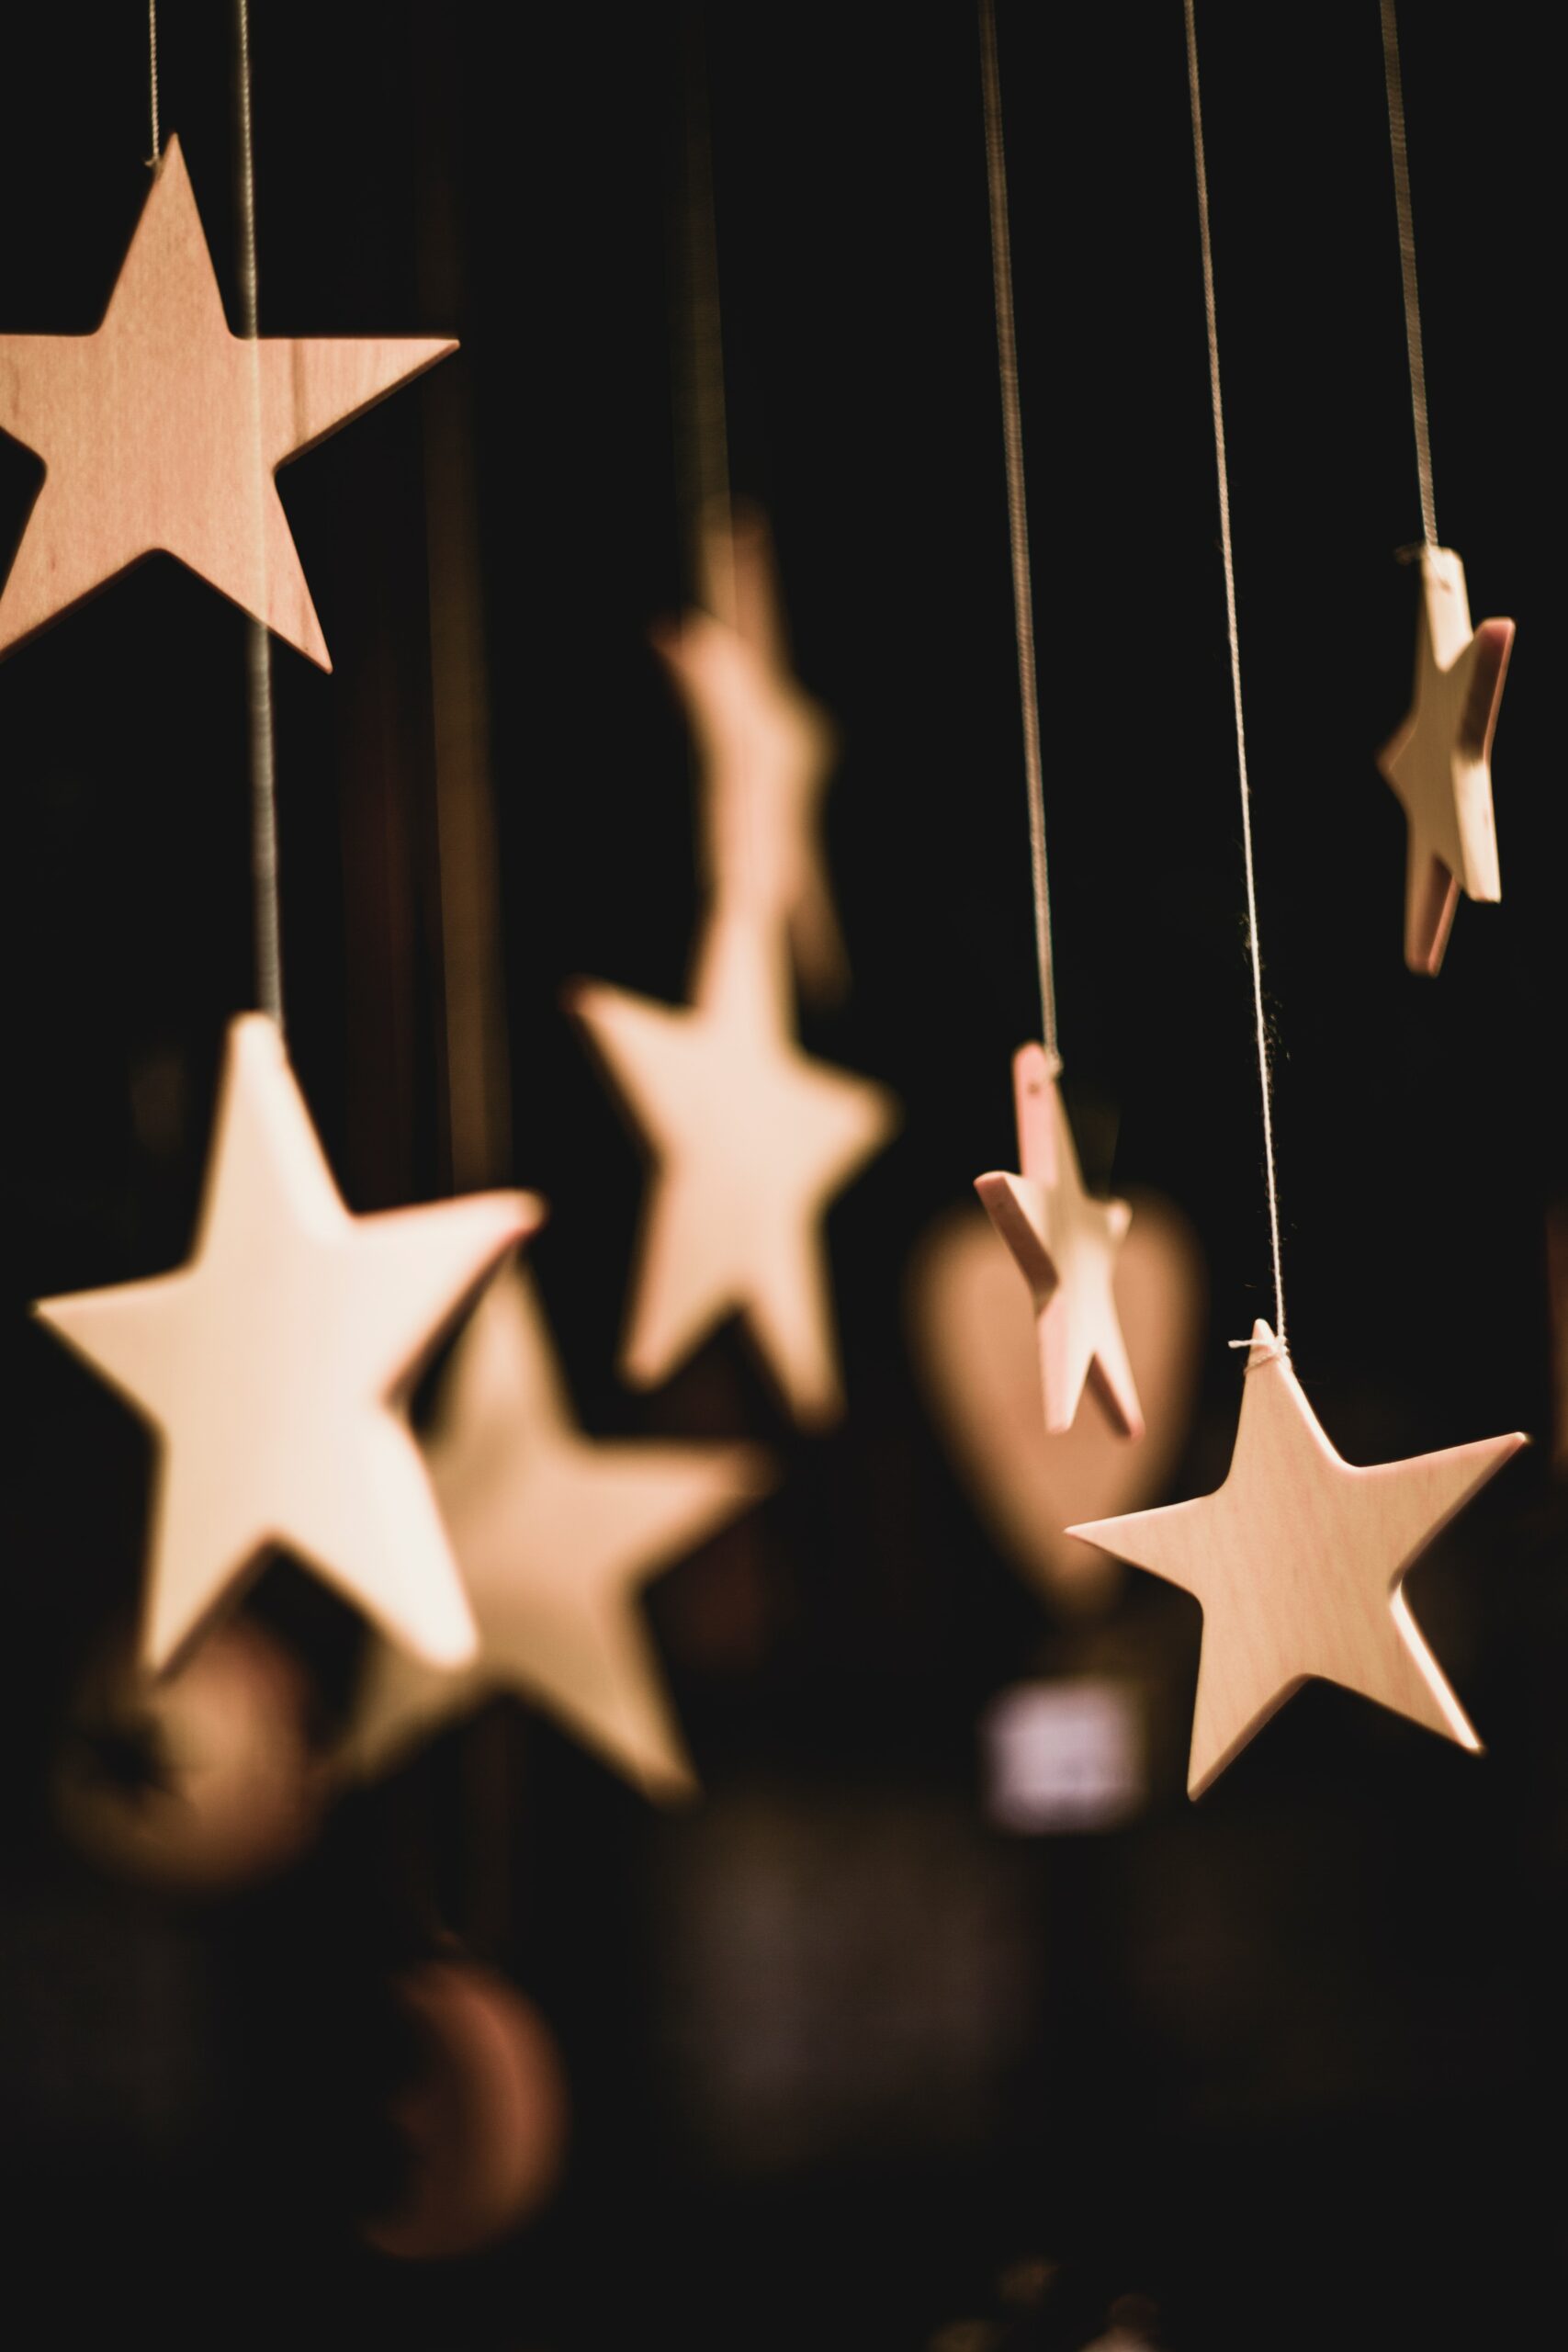 Light brown wooden stars hang on fishing line against a black background and are shown from slightly below.